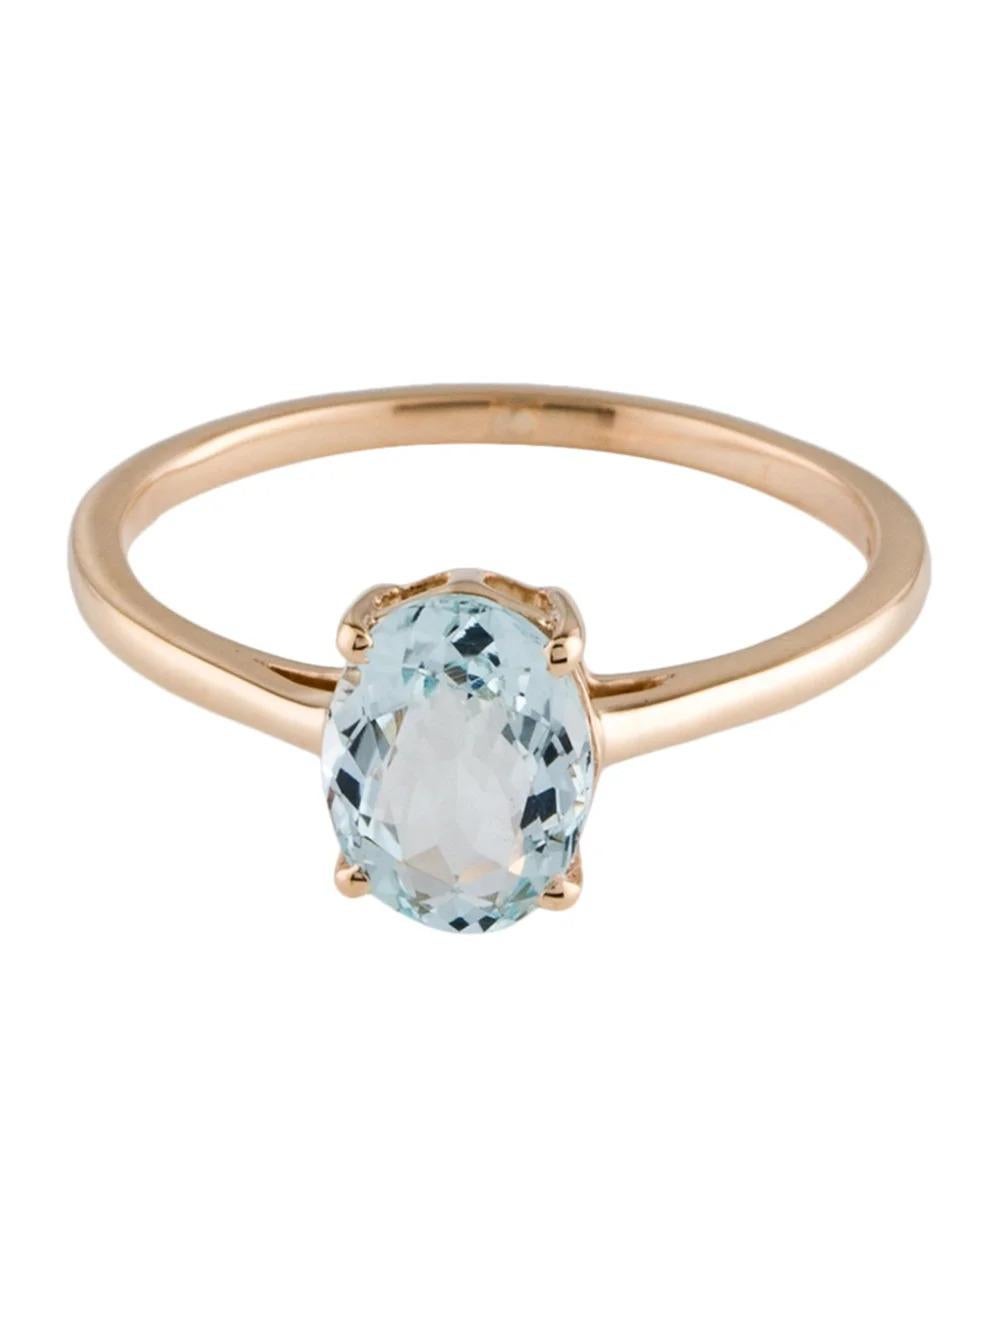 Taille ovale 14K 1.00ct Aquamarine Cocktail Ring Size 6.75 - Blue Gemstone, Statement Jewelry en vente